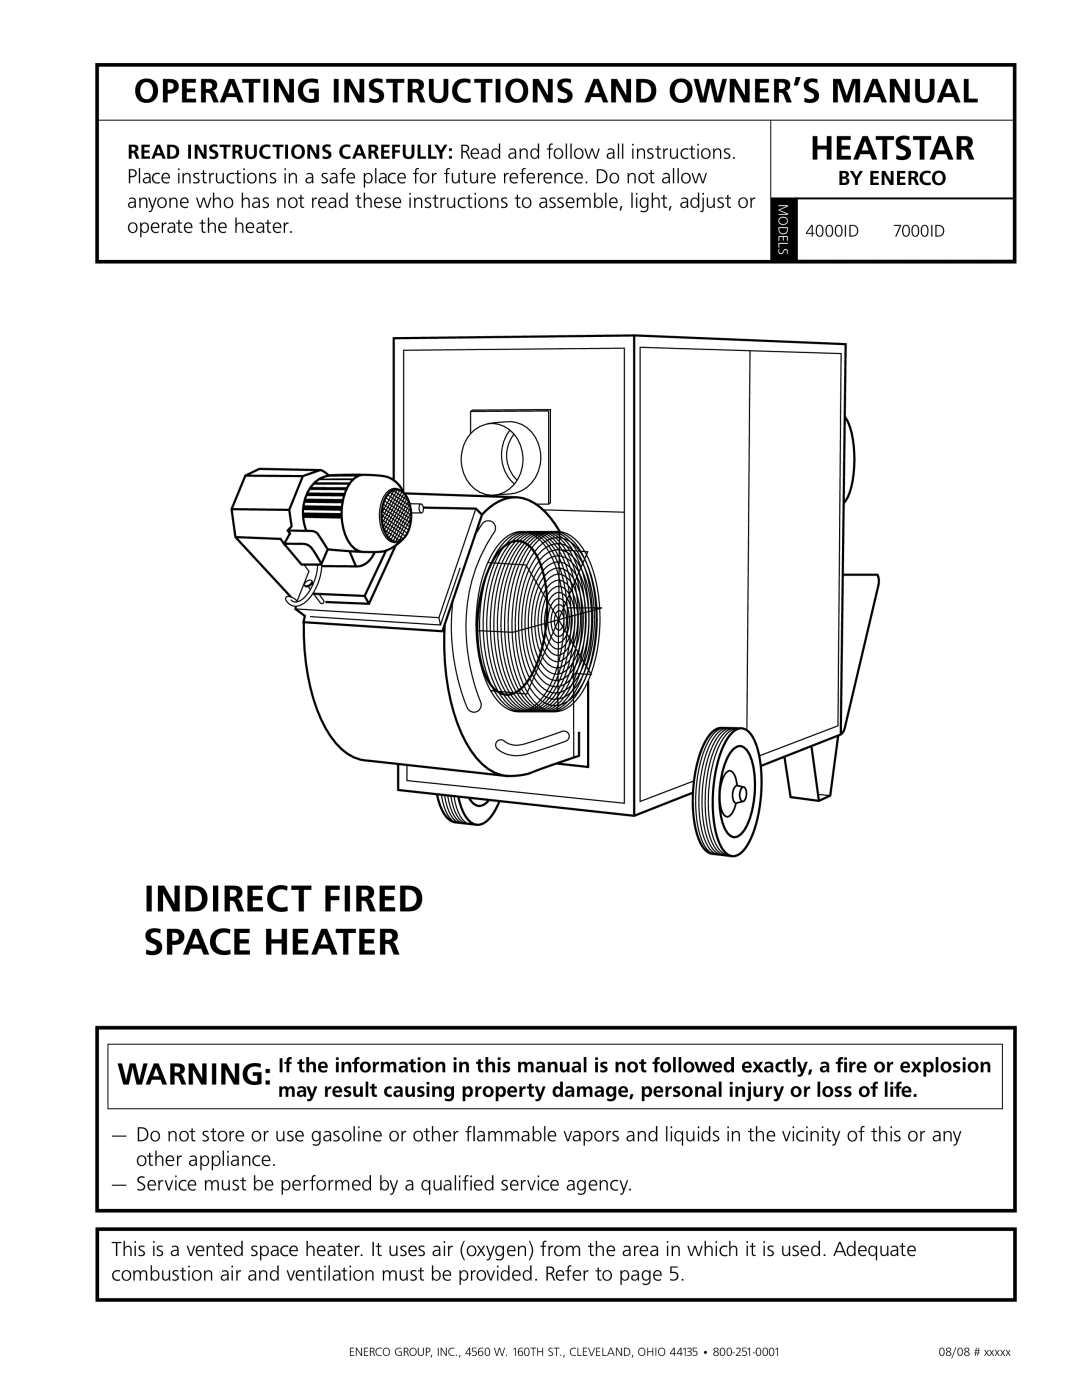 Enerco 7000ID owner manual heatstar, BY eNERCO, INDIRECT FIRED Space HEATER 